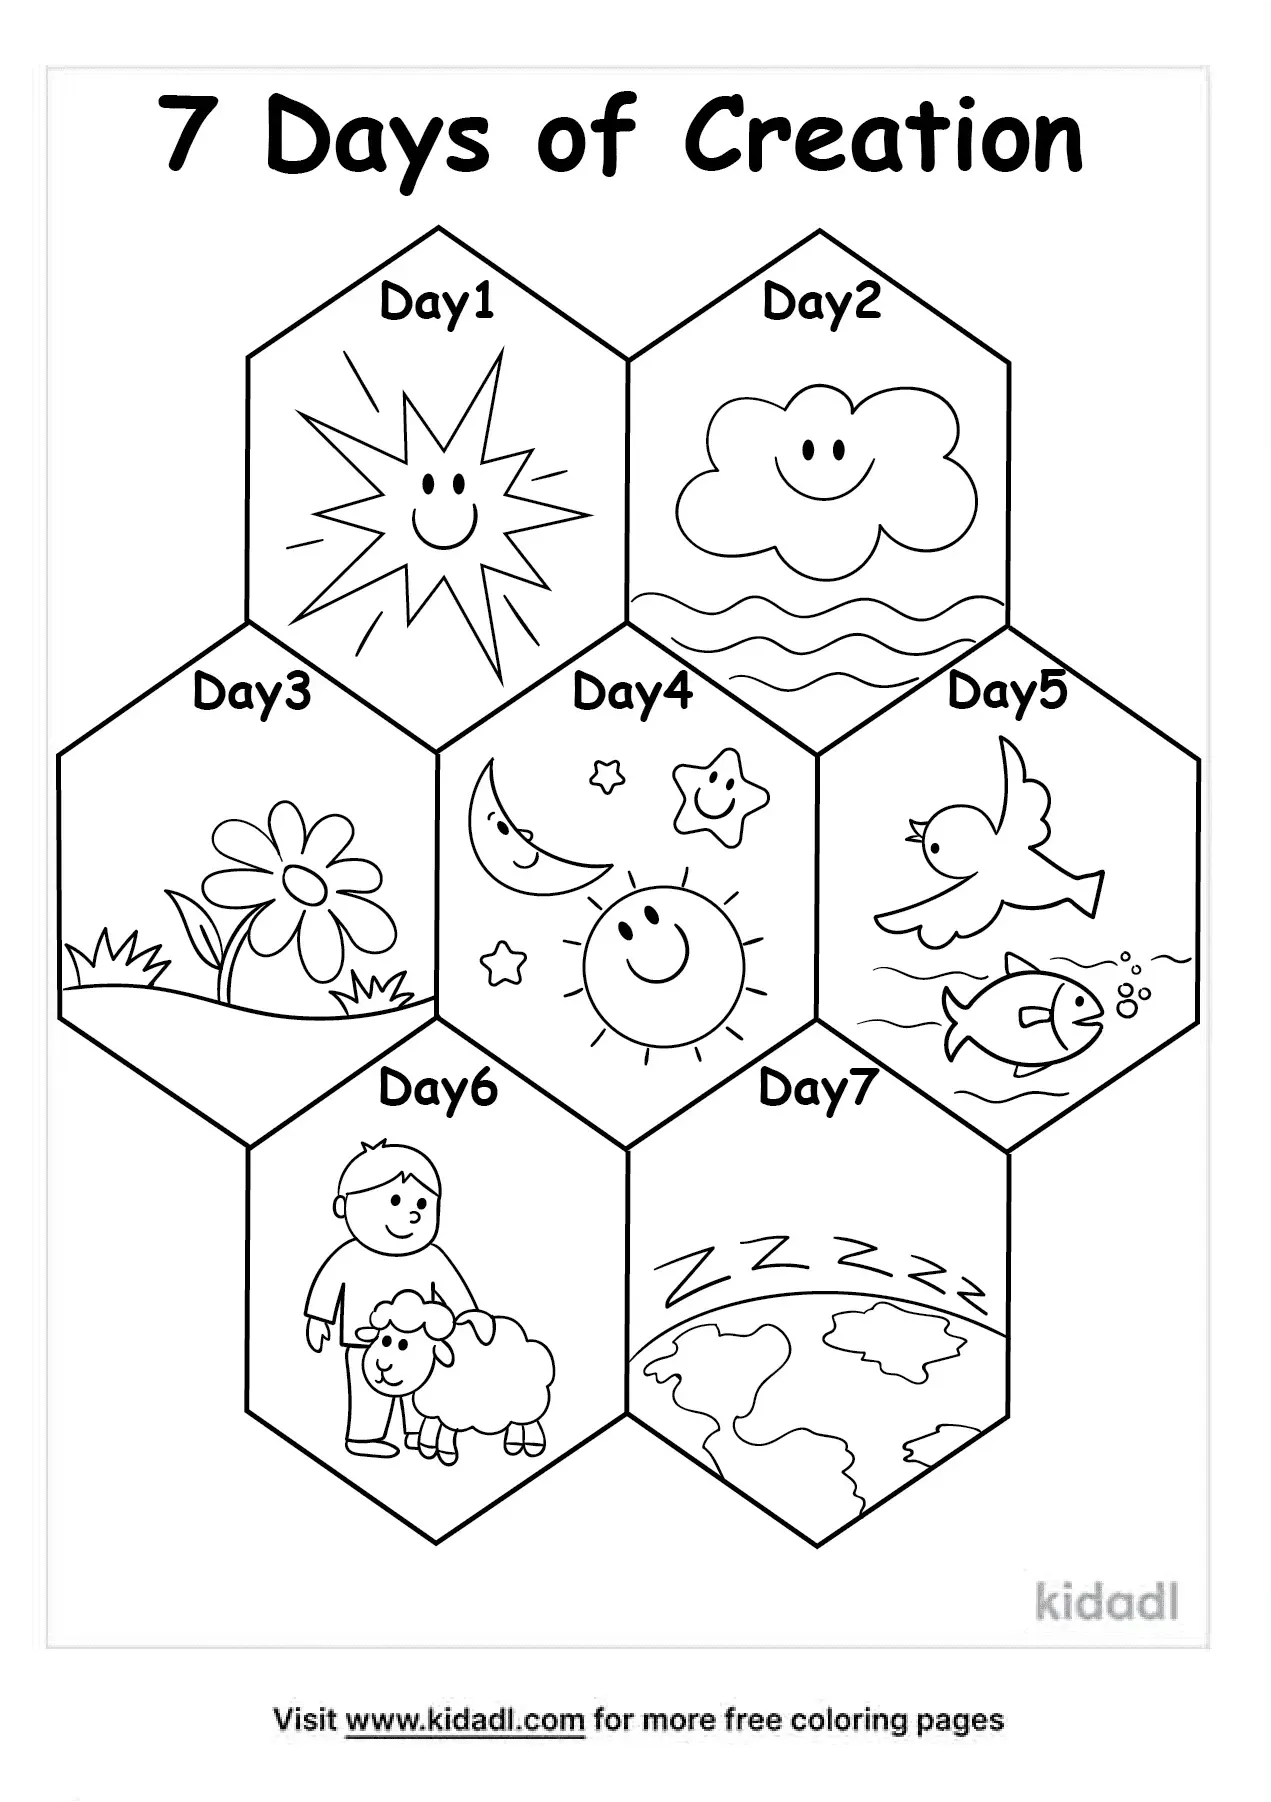 days-of-creation-sheets-coloring-pages-the-best-porn-website